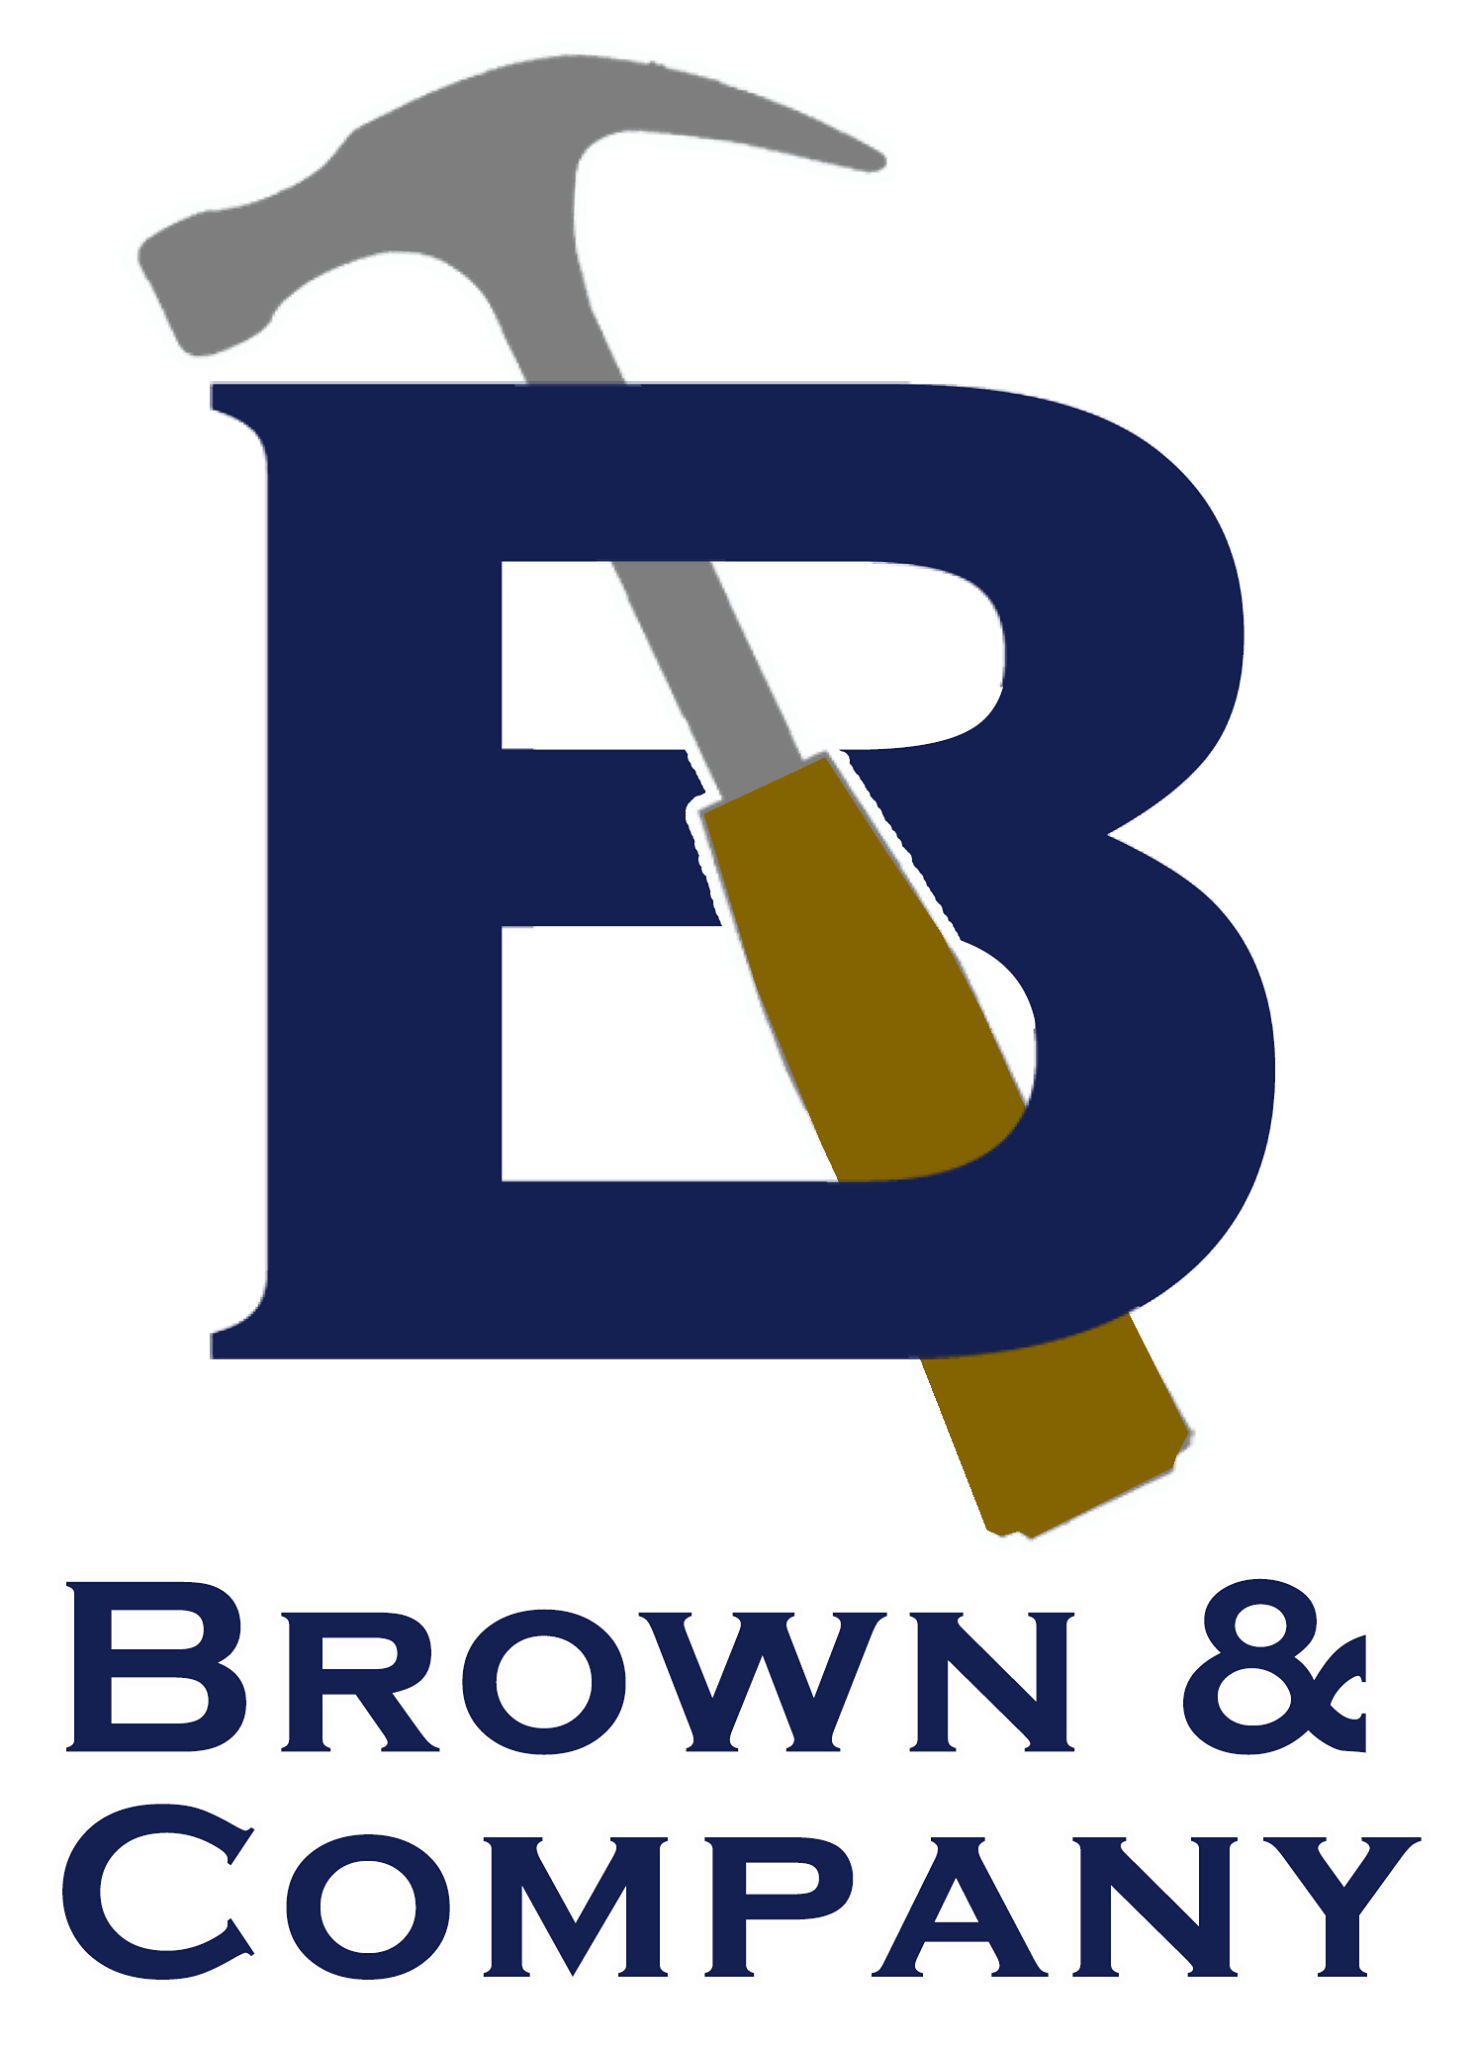 Brown & Company Contracting Inc. 768 Middle Country Rd, St James New York 11780